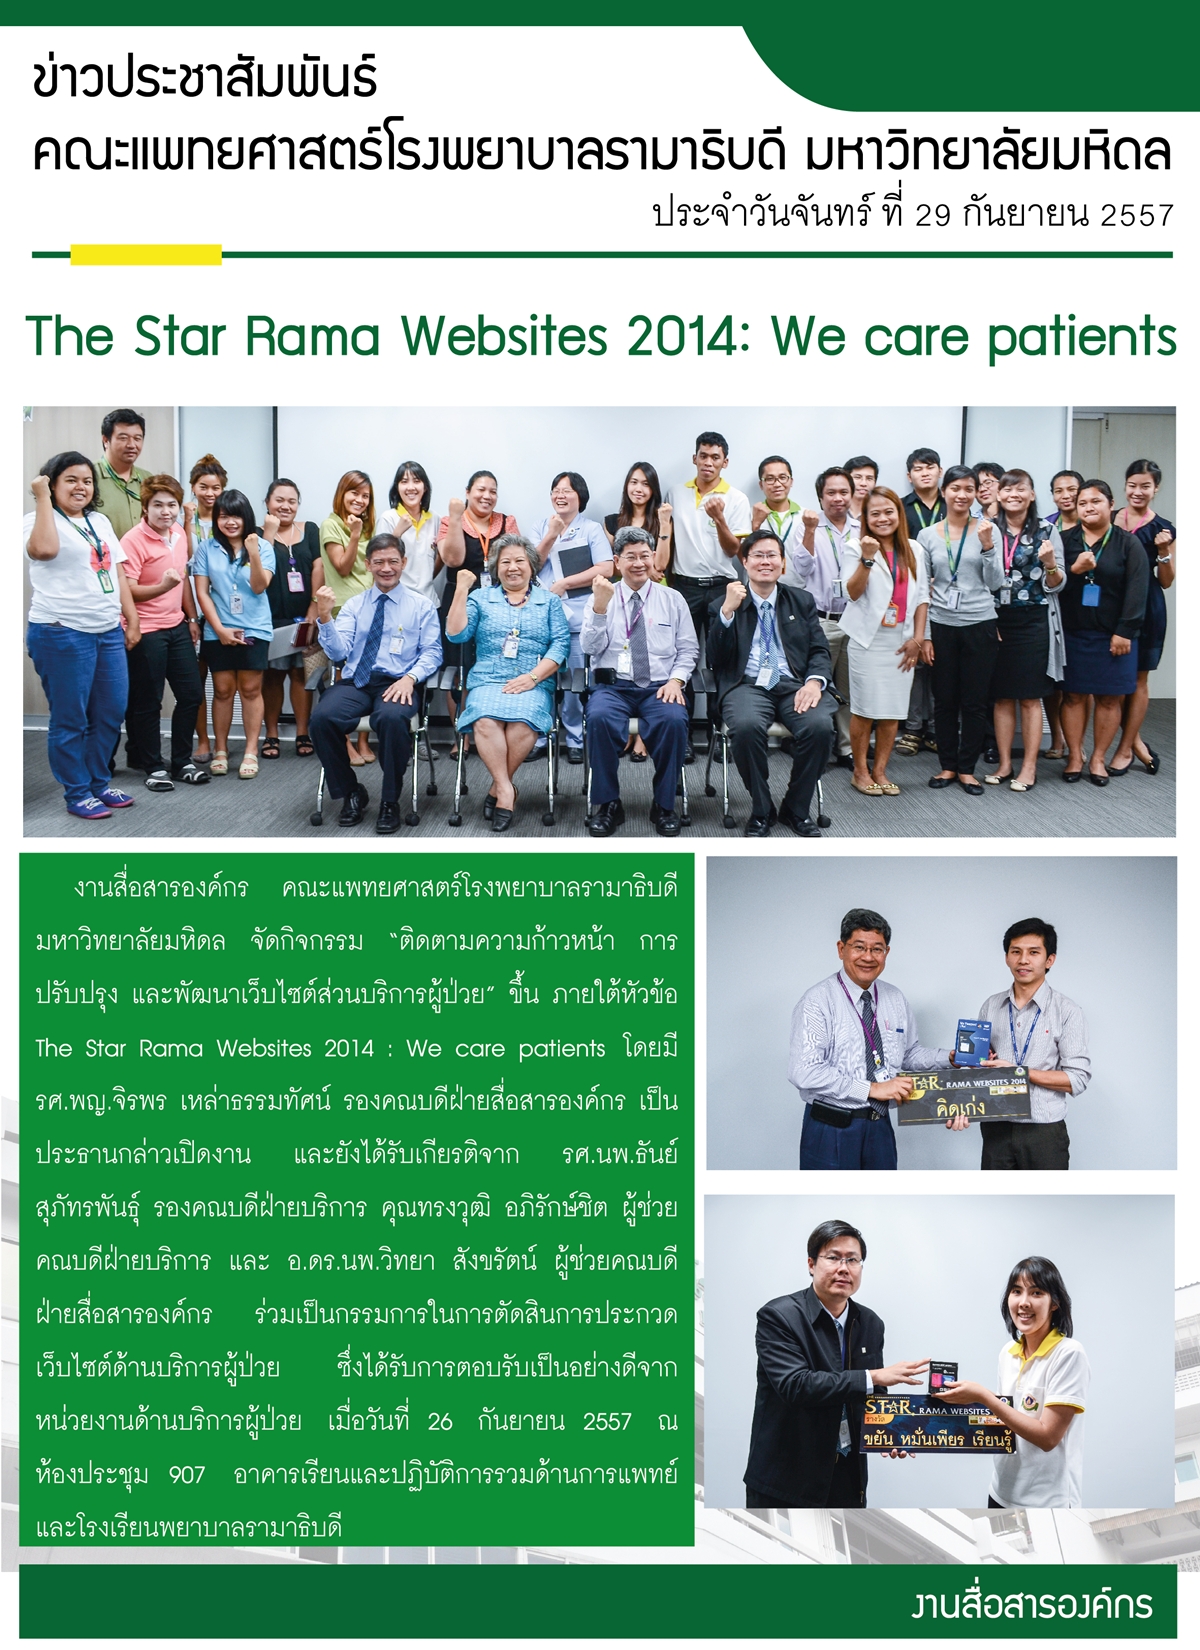 The Star Rama Websites 2014: We care patients